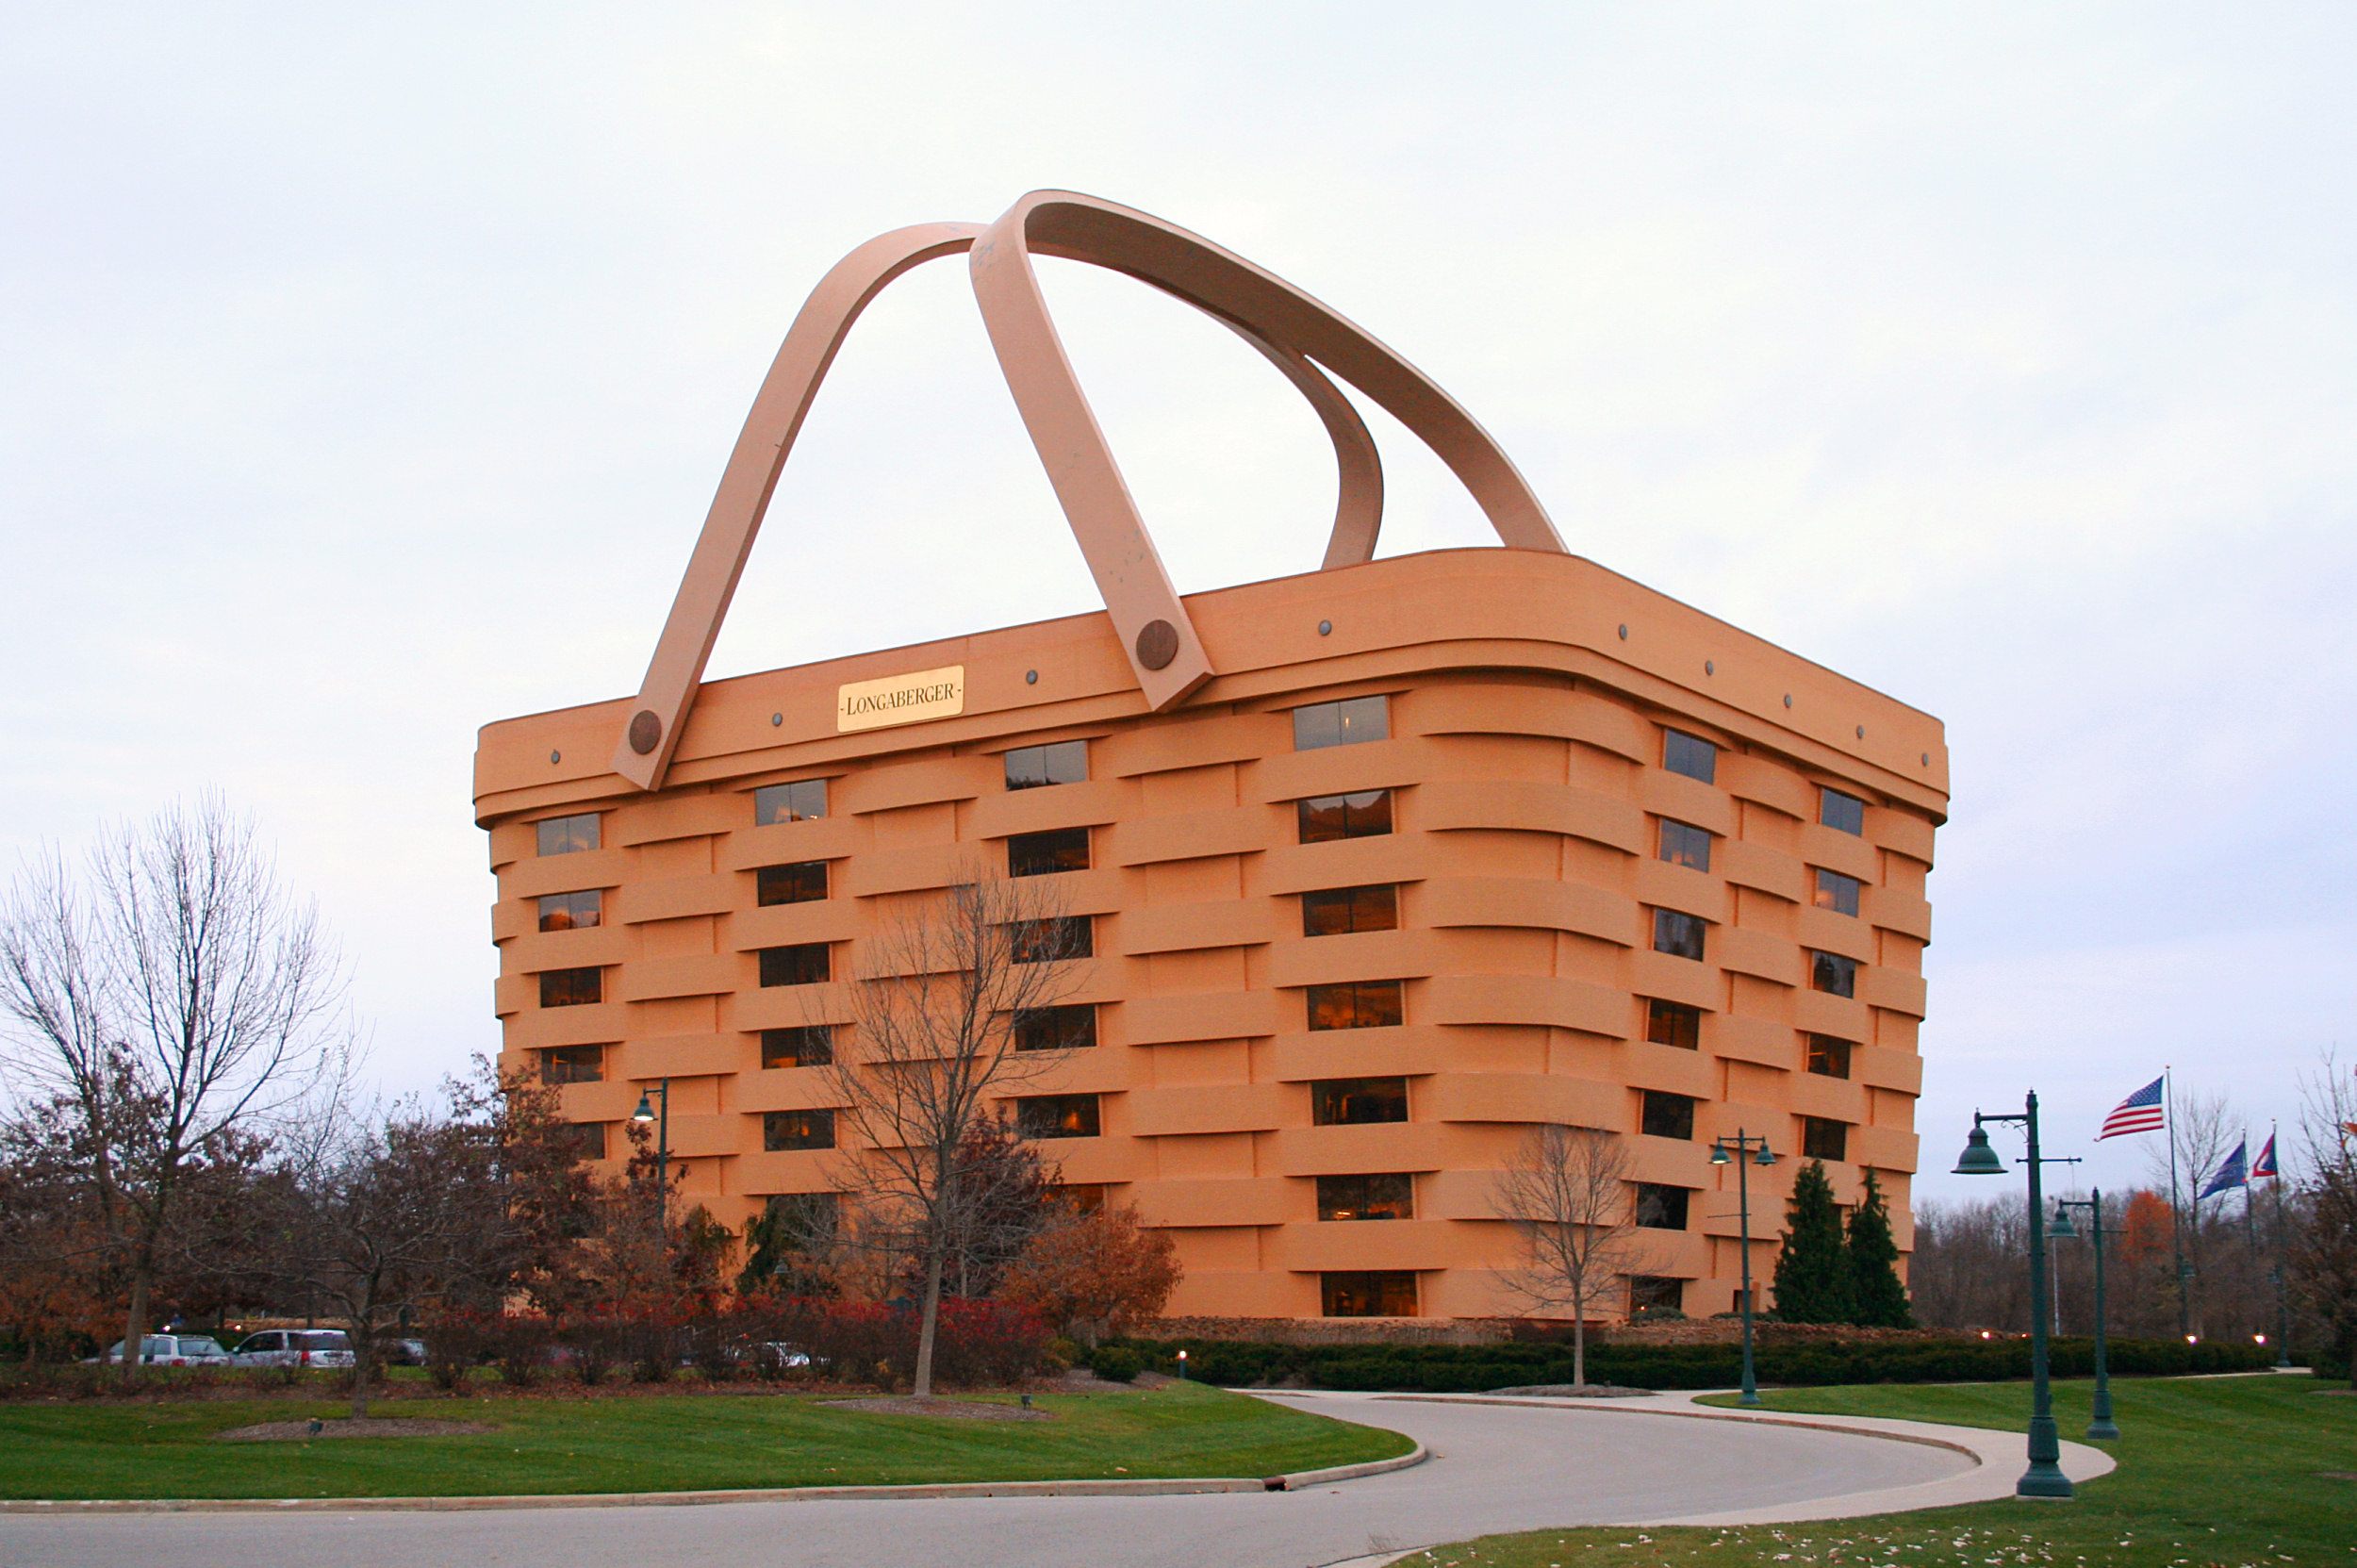 The Most Bizarre Buildings in the World